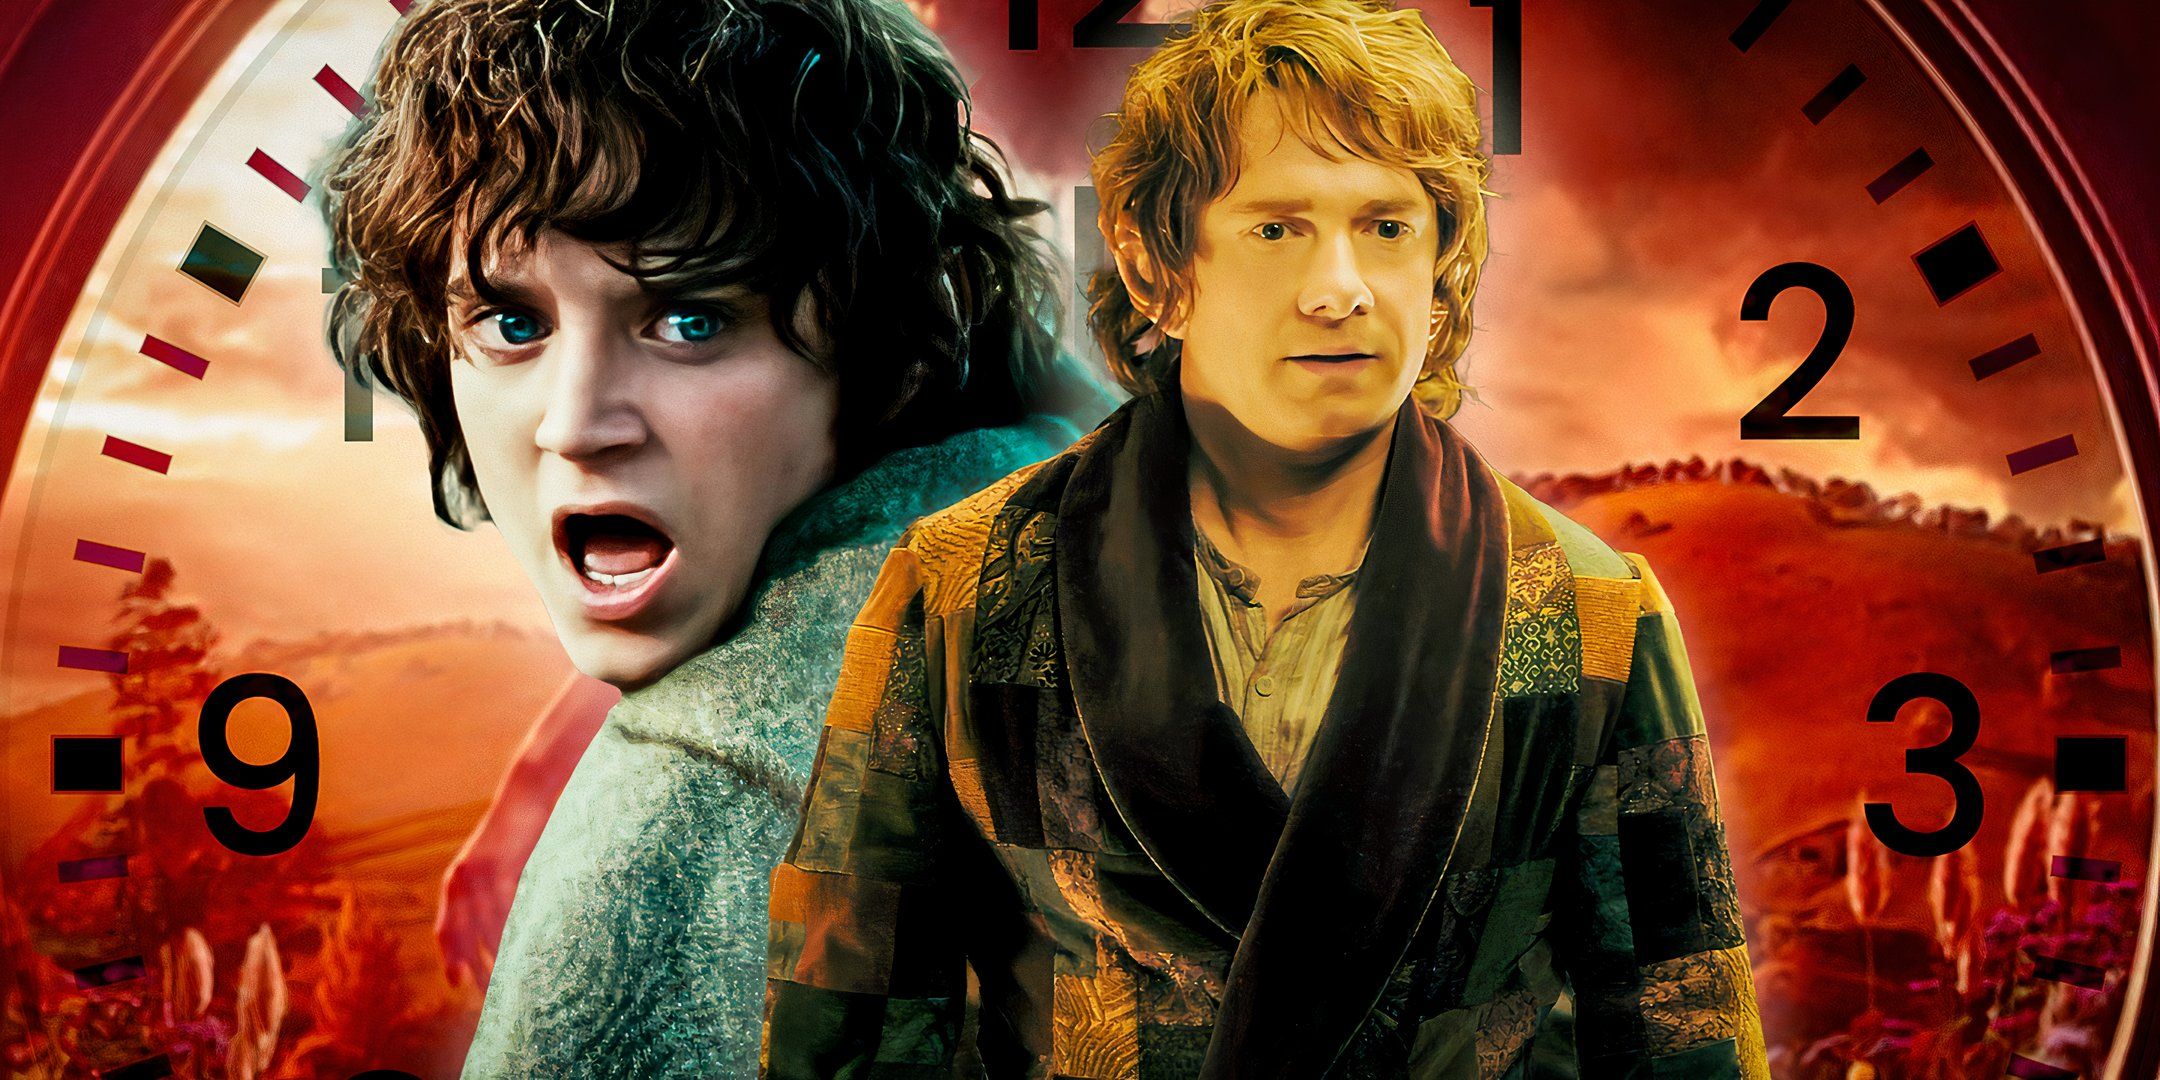 Martin Freeman as Bilbo from The Hobbit An Unexpected Journey and Elijah Wood as Frodo from The Lord of the Rings The Fellowship of the Ring.